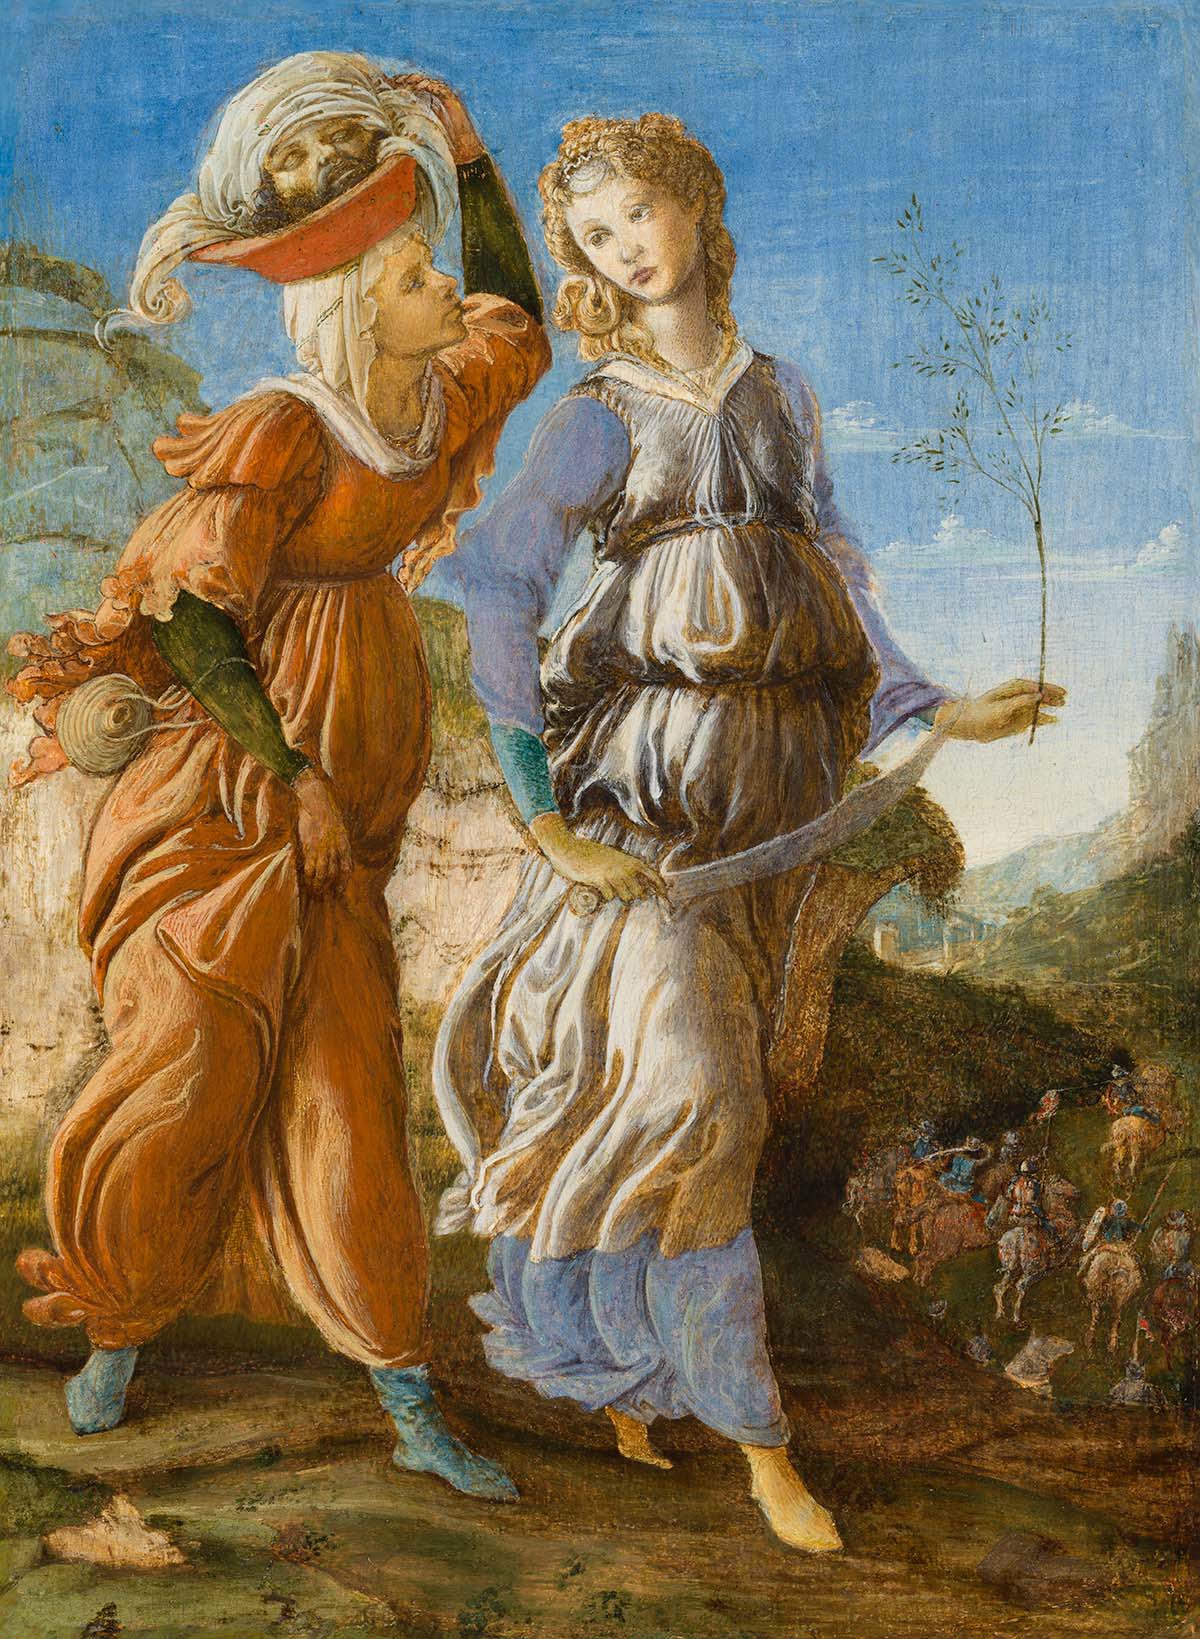 A painting of two women walking together. One has a severed head hidden in a basket on her head.